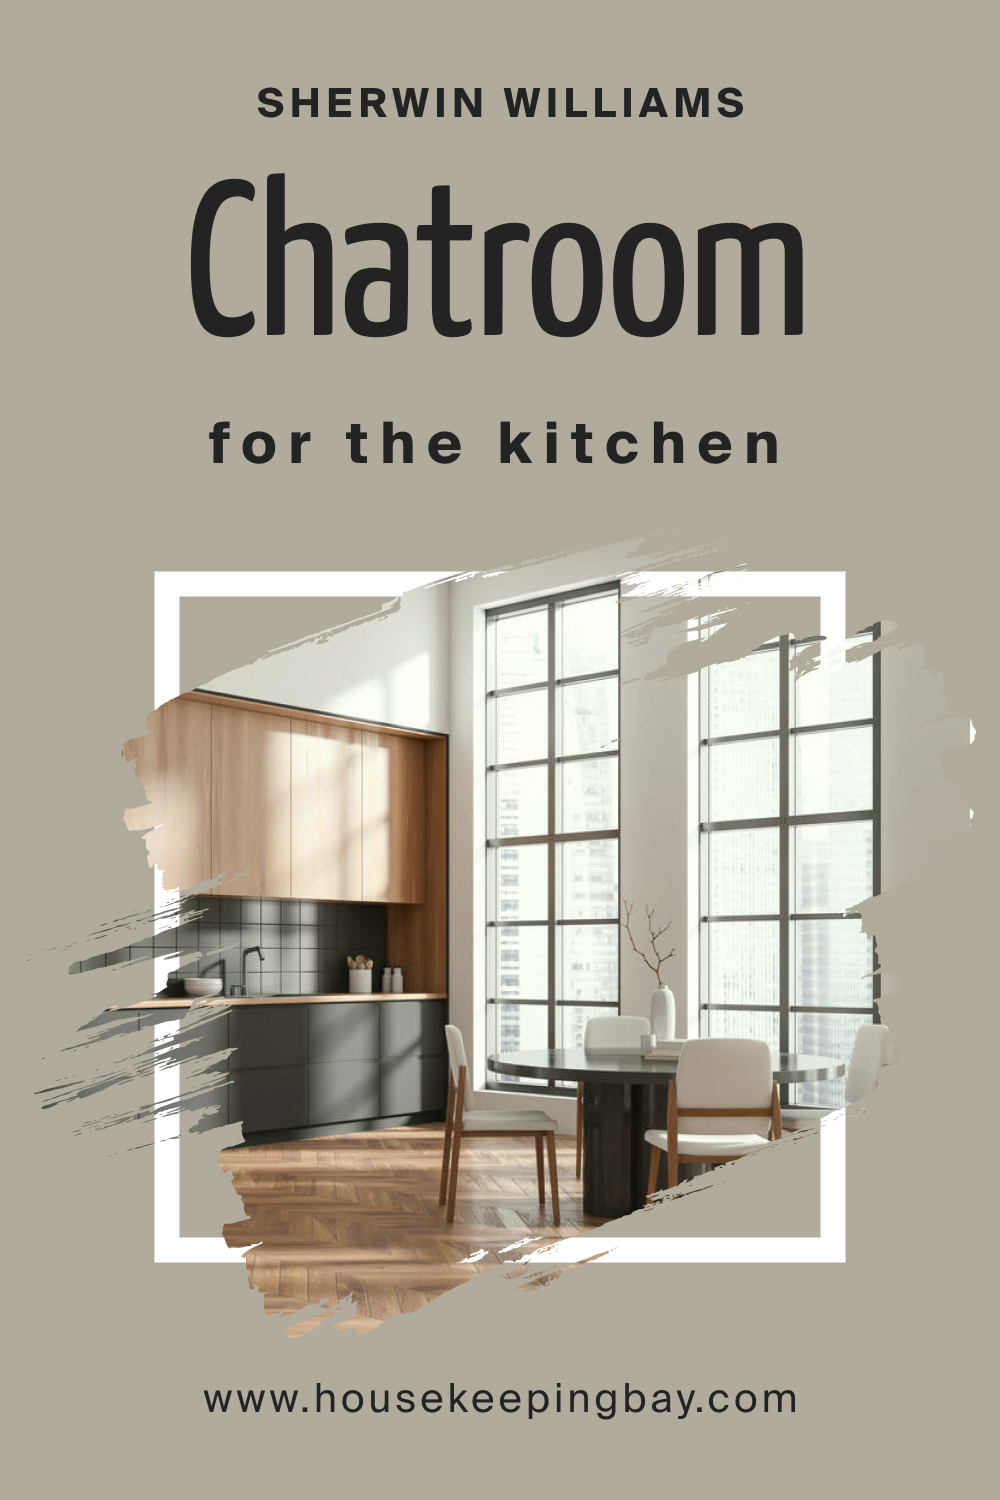 Sherwin Williams. SW 6171 Chatroom For the Kitchens